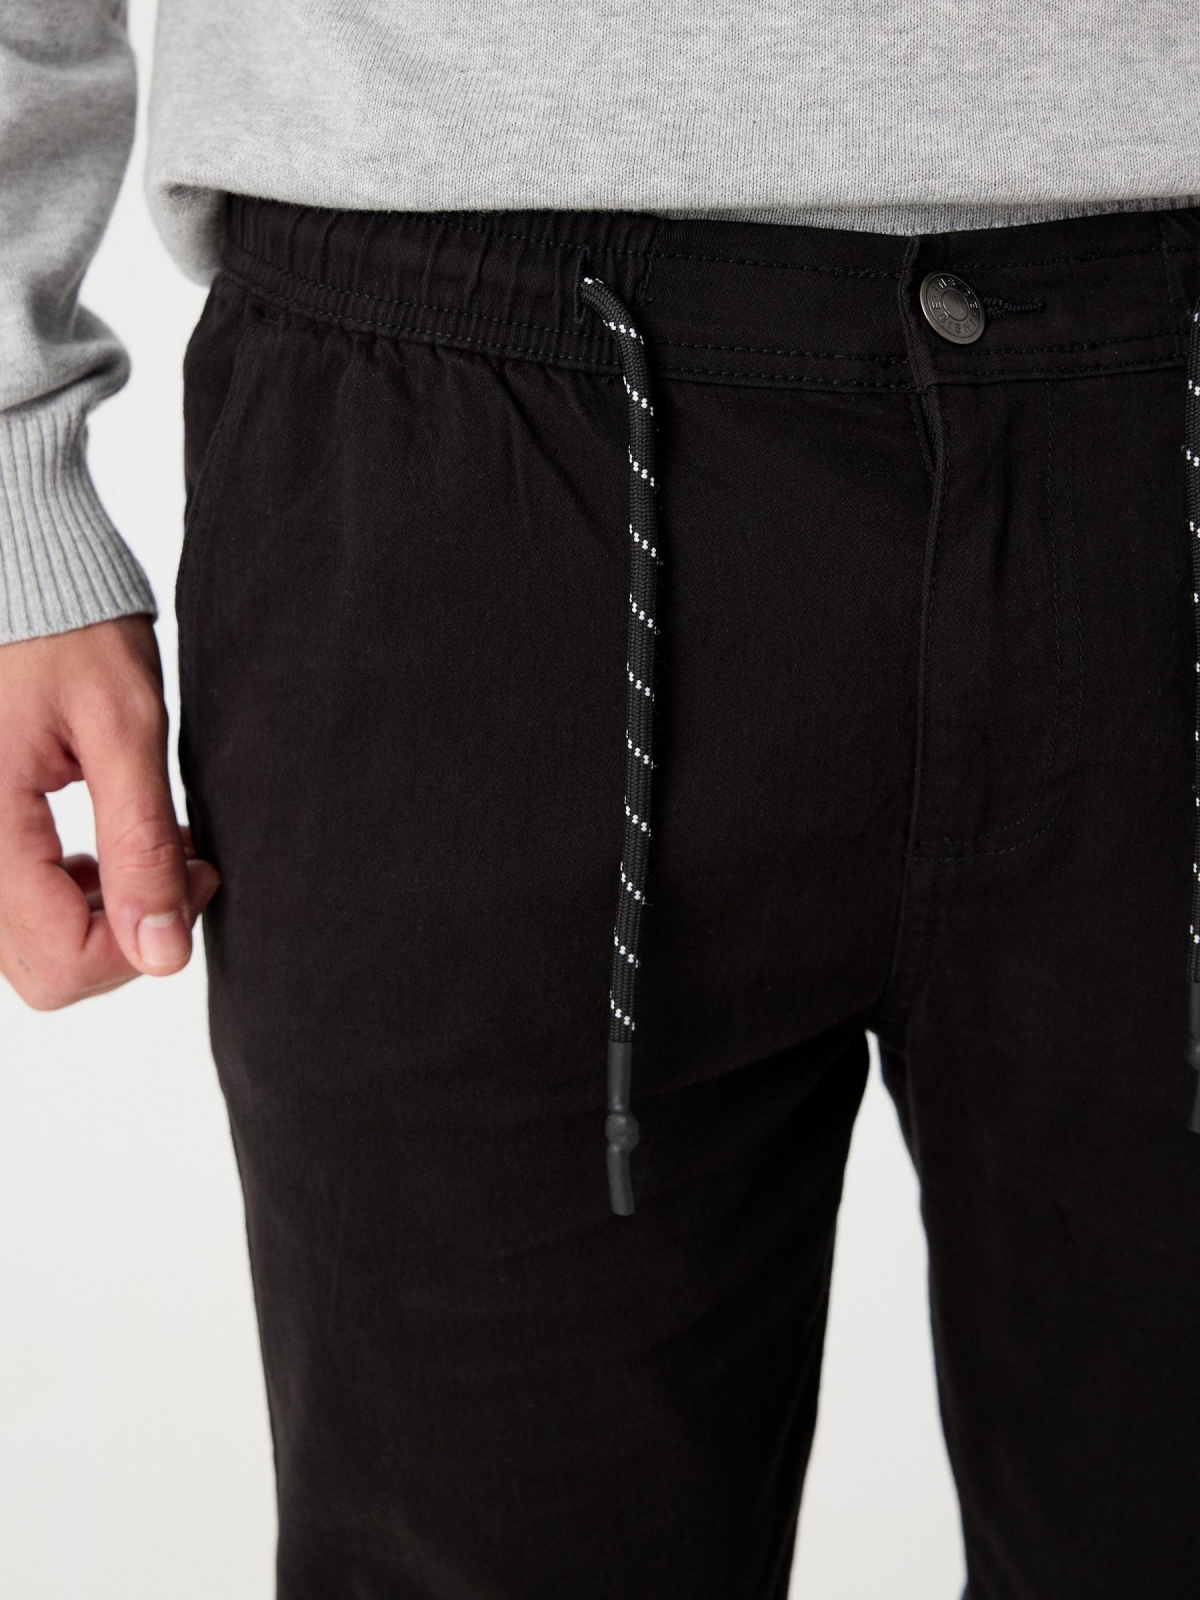 Knotted jogger pants black detail view